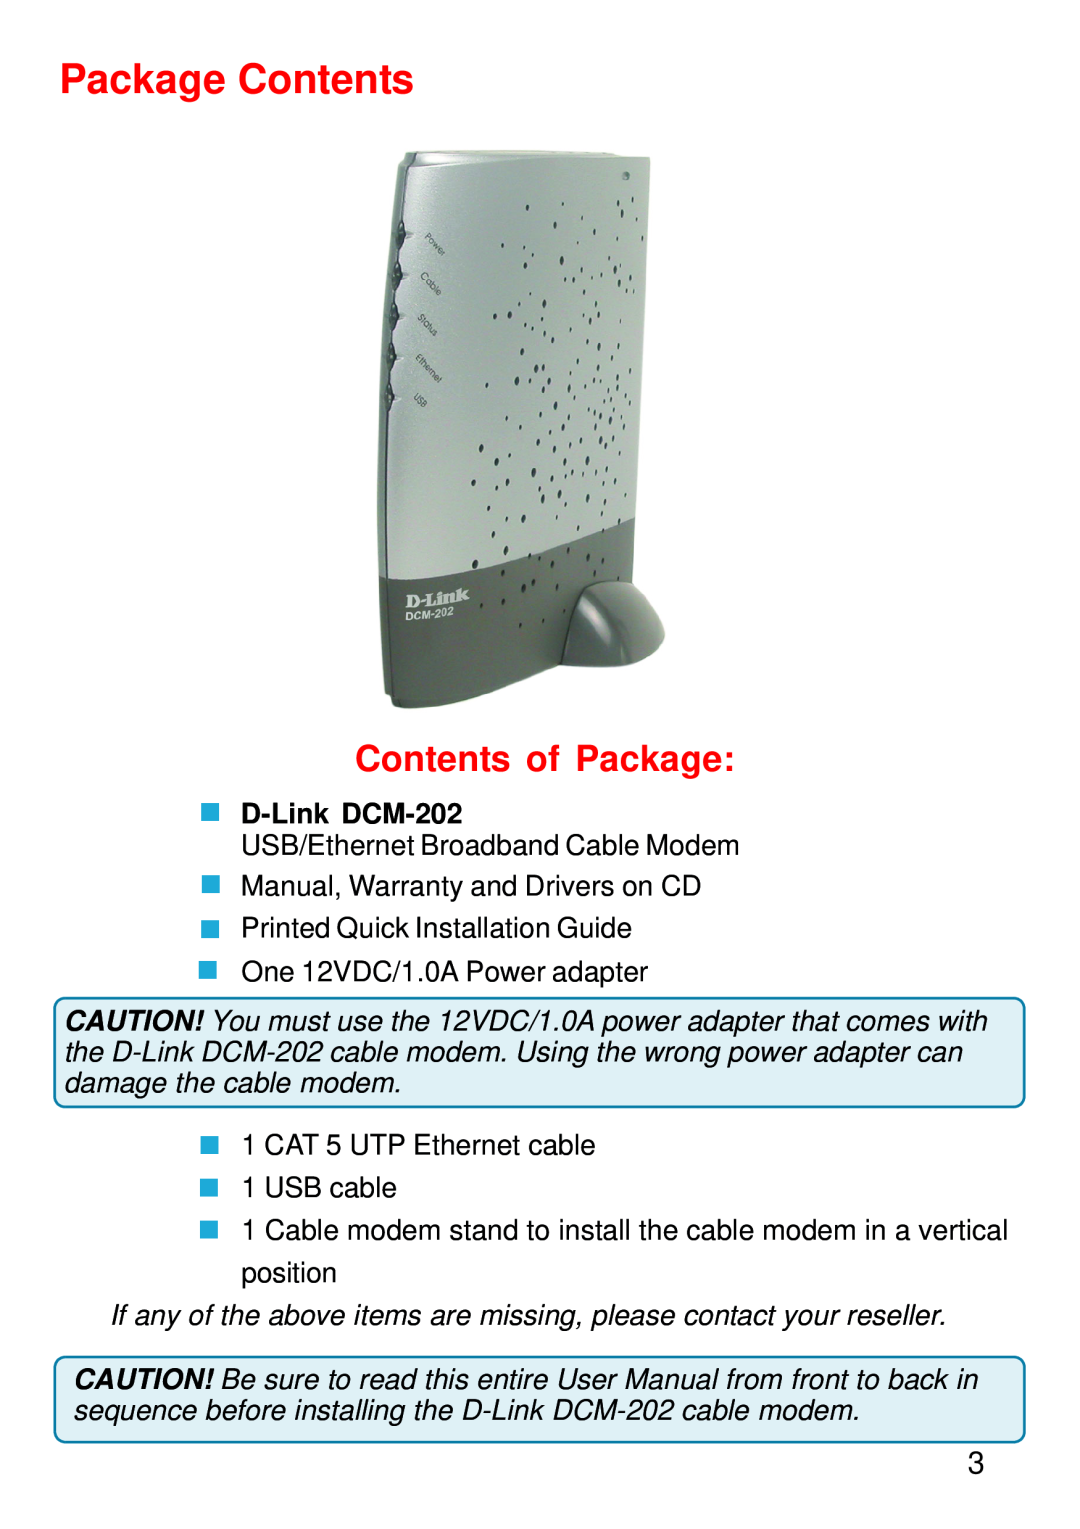 D-Link manual Package Contents, Contents of Package, D-Link DCM-202 